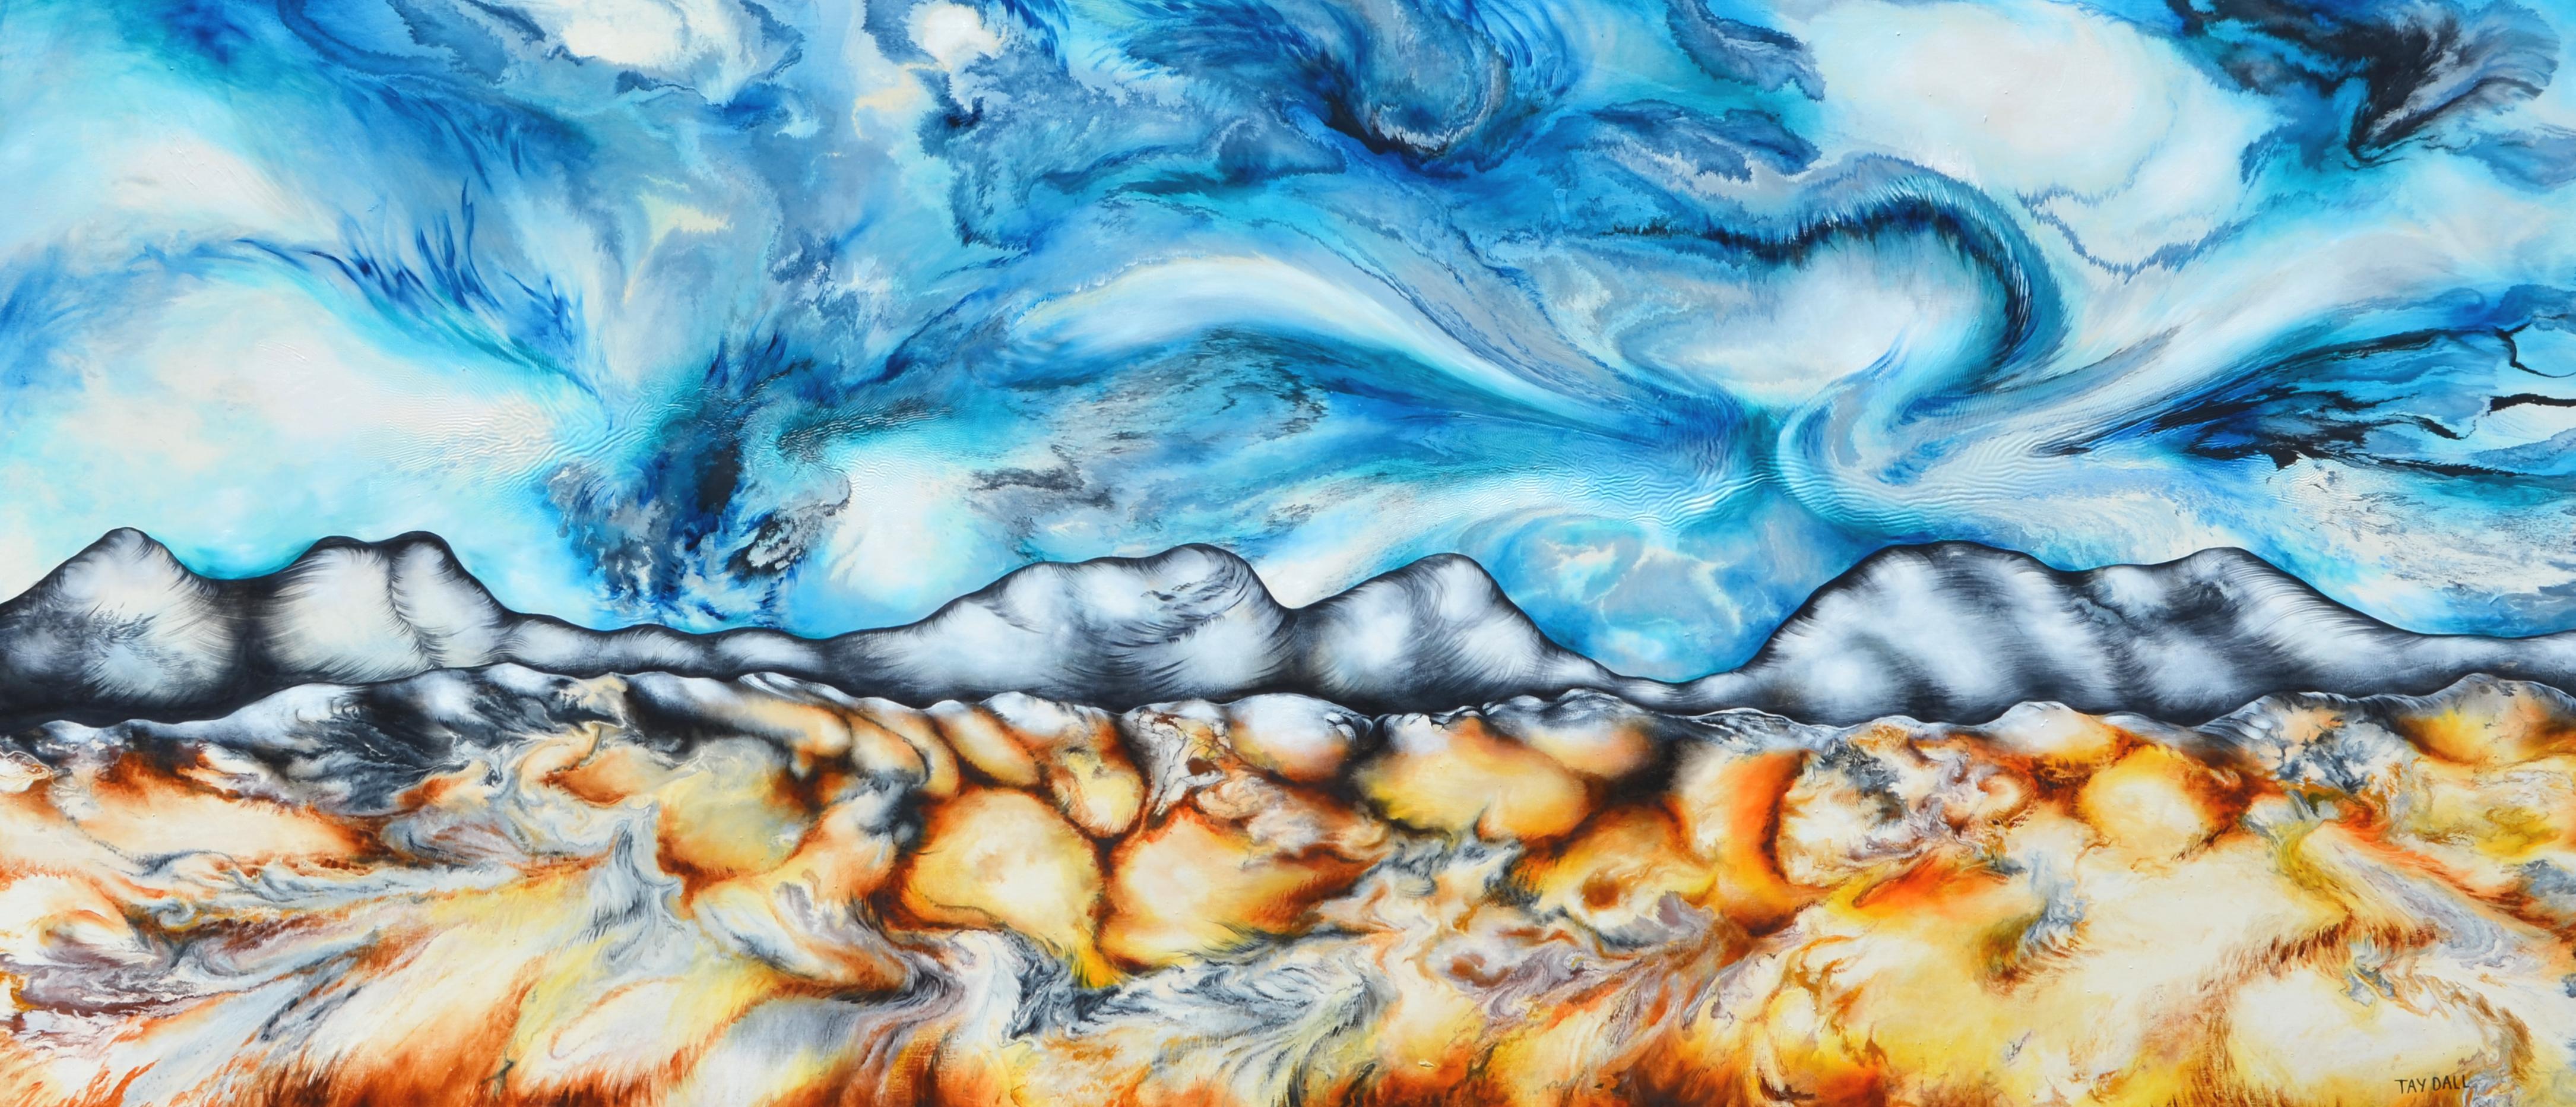 Tay Dall Abstract Painting - Large Surreal Abstract Landscape Painting "Blue Sky Beyond 17"